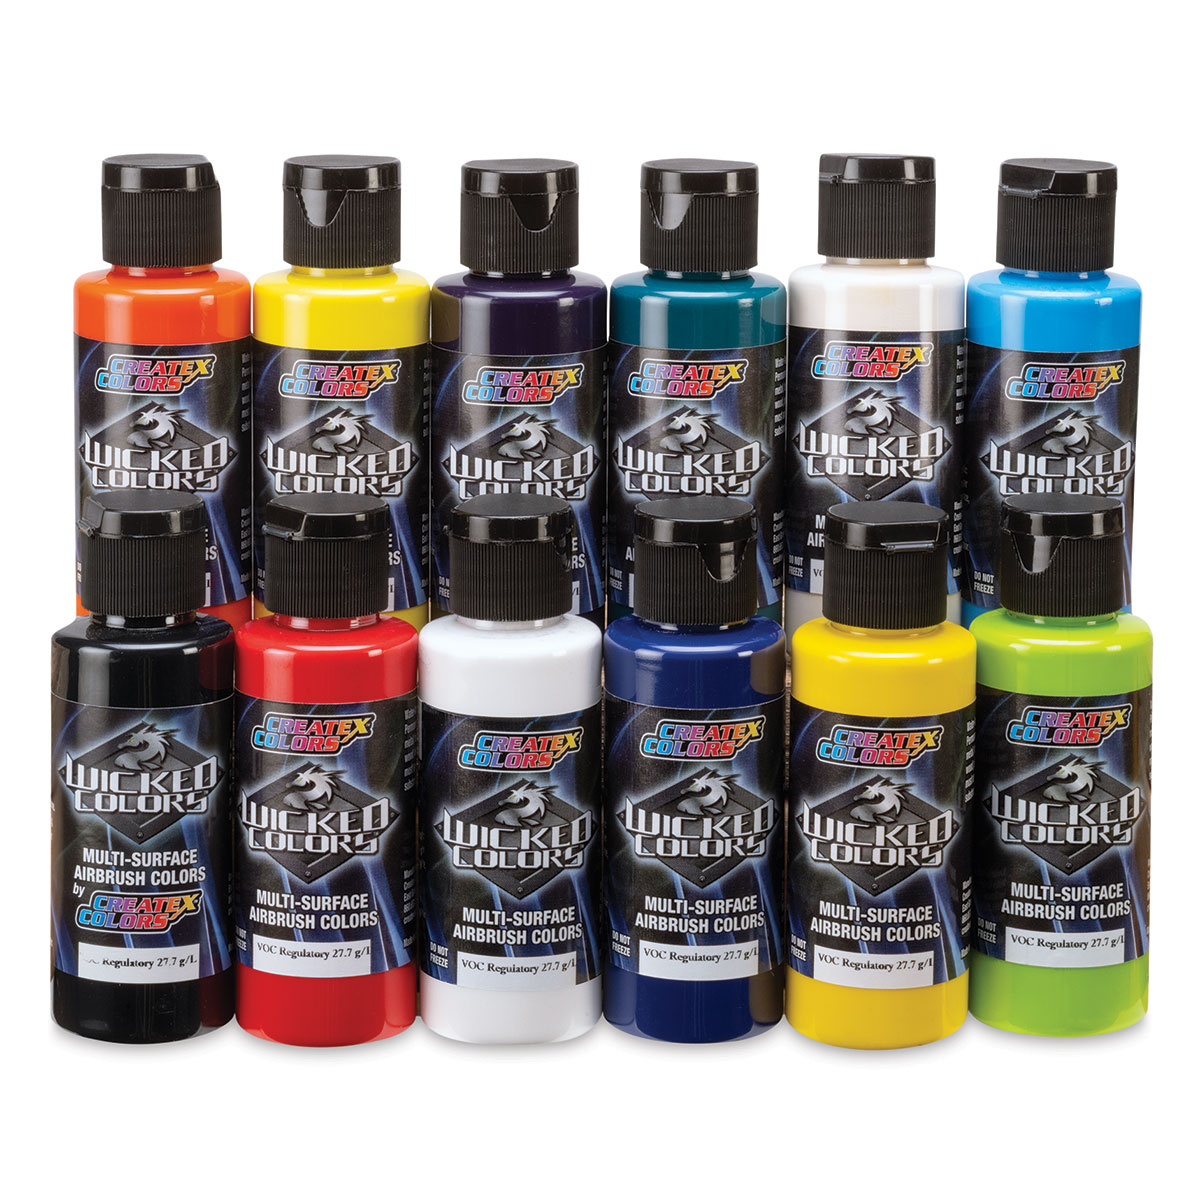 Airbrush Paint Kits for sale in St. Louis